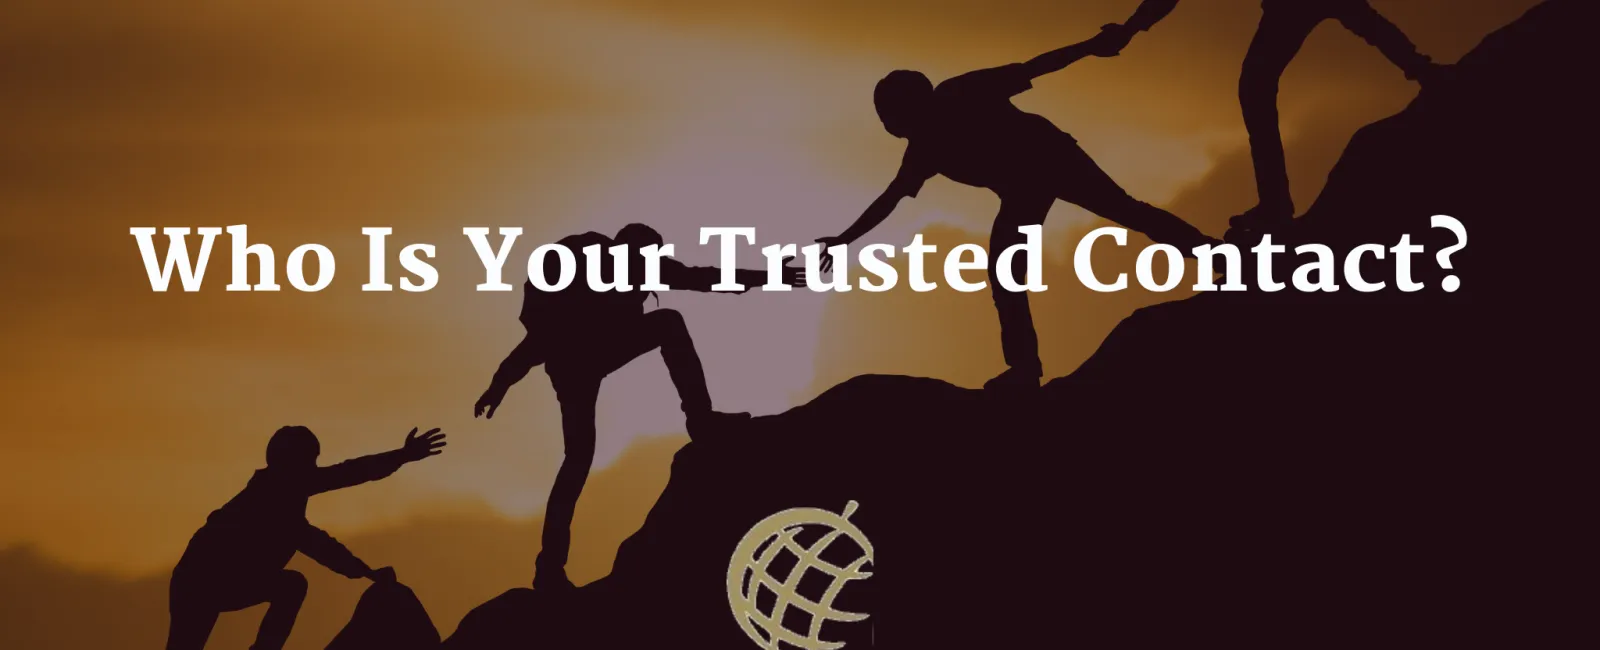 Who Is Your Trusted Contact?